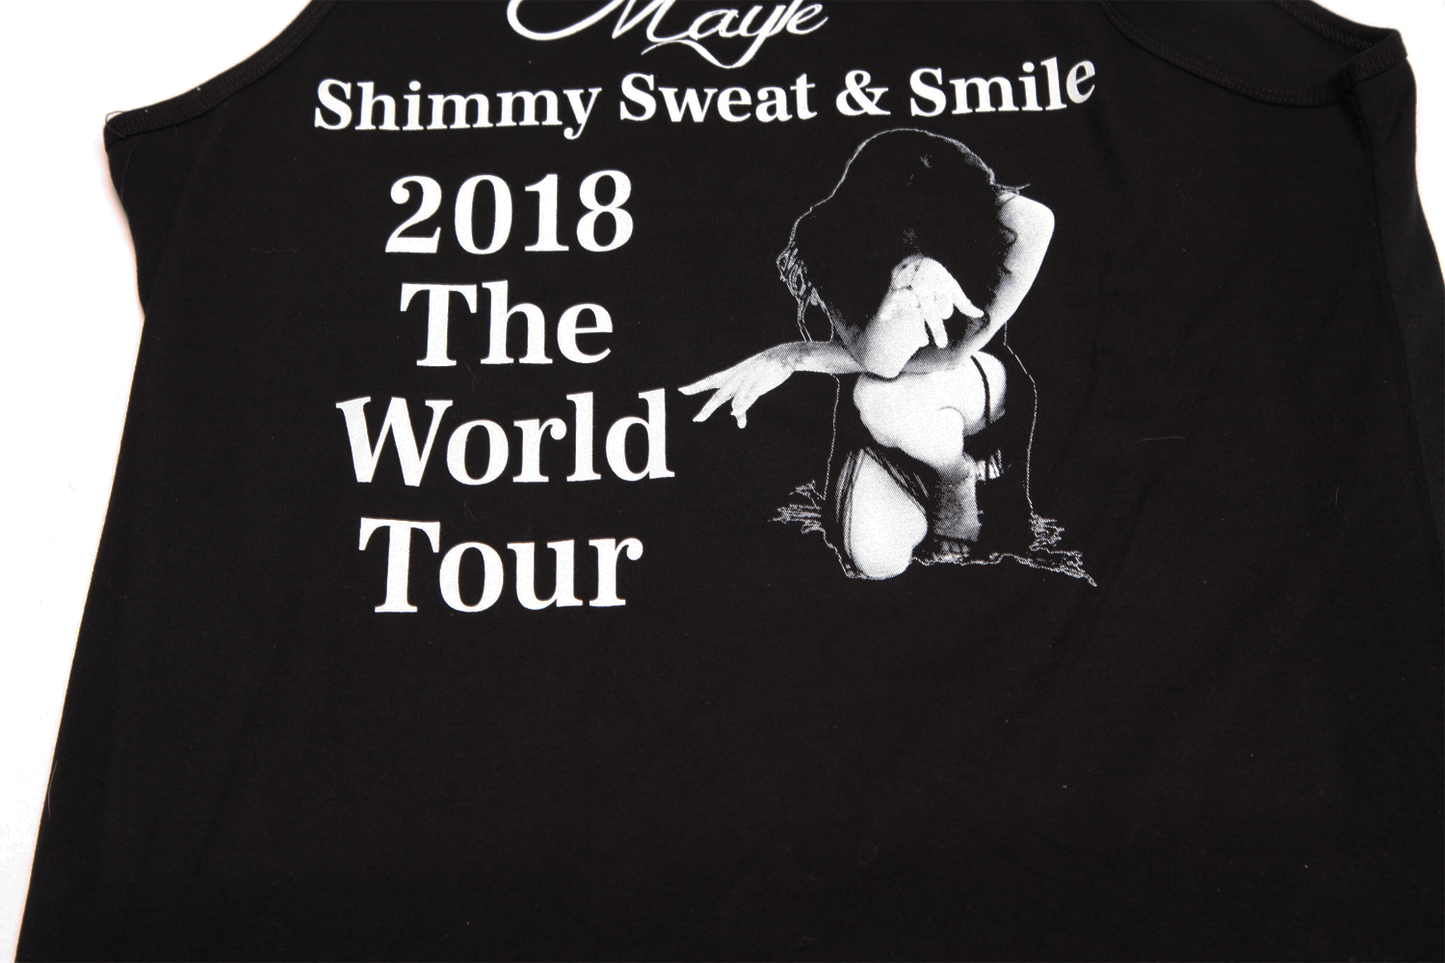 Mayte's Shimmy, Sweat and Smile 2018 World Tour Tank Top